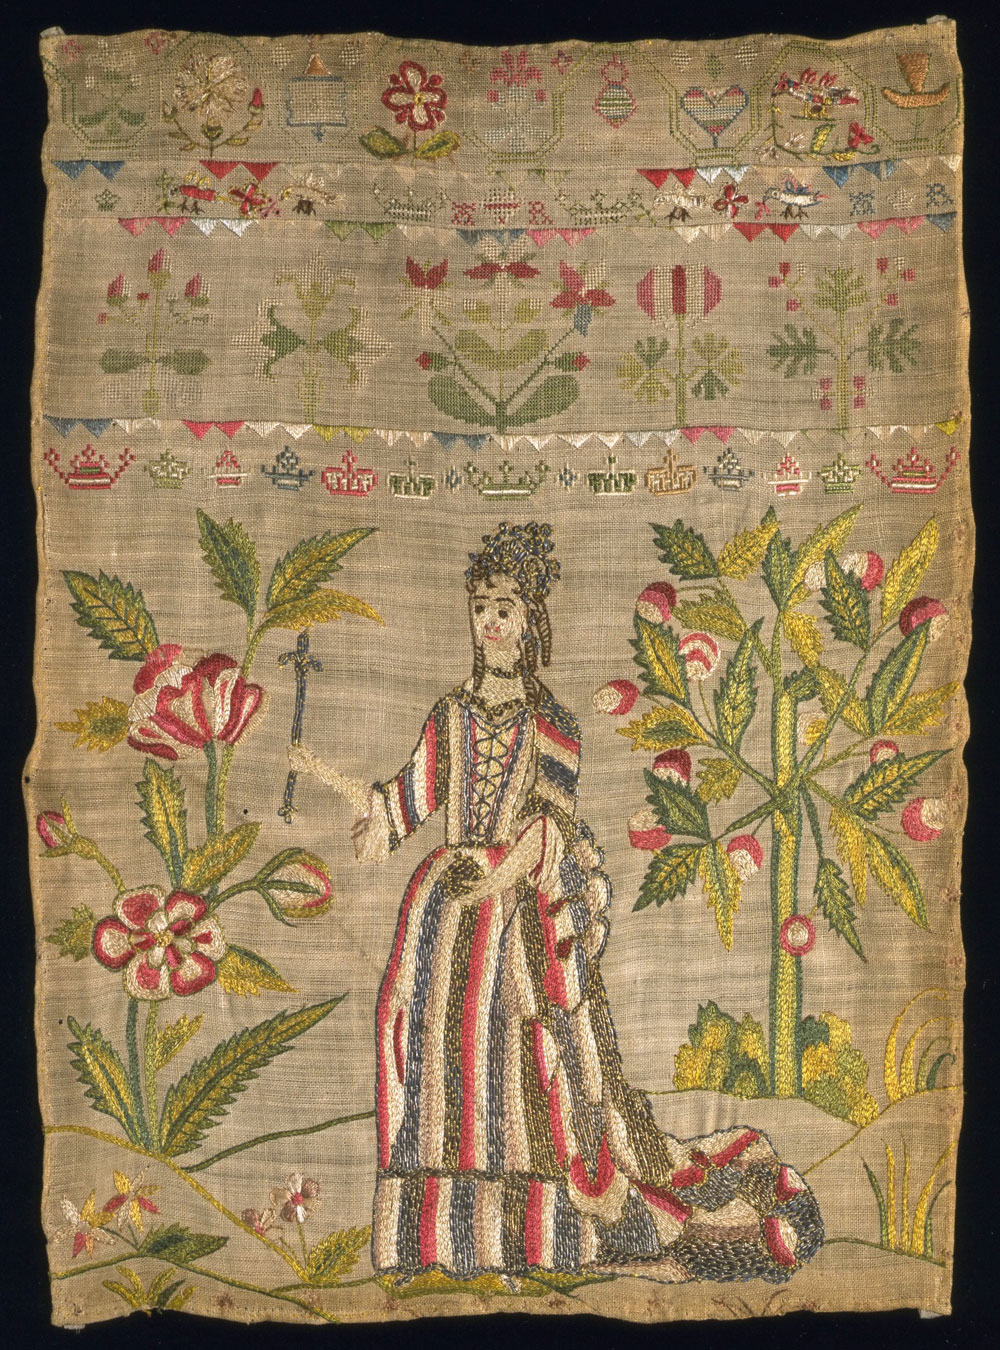 18Th Century Embroidery Patterns A History Of Samplers Victoria And Albert Museum